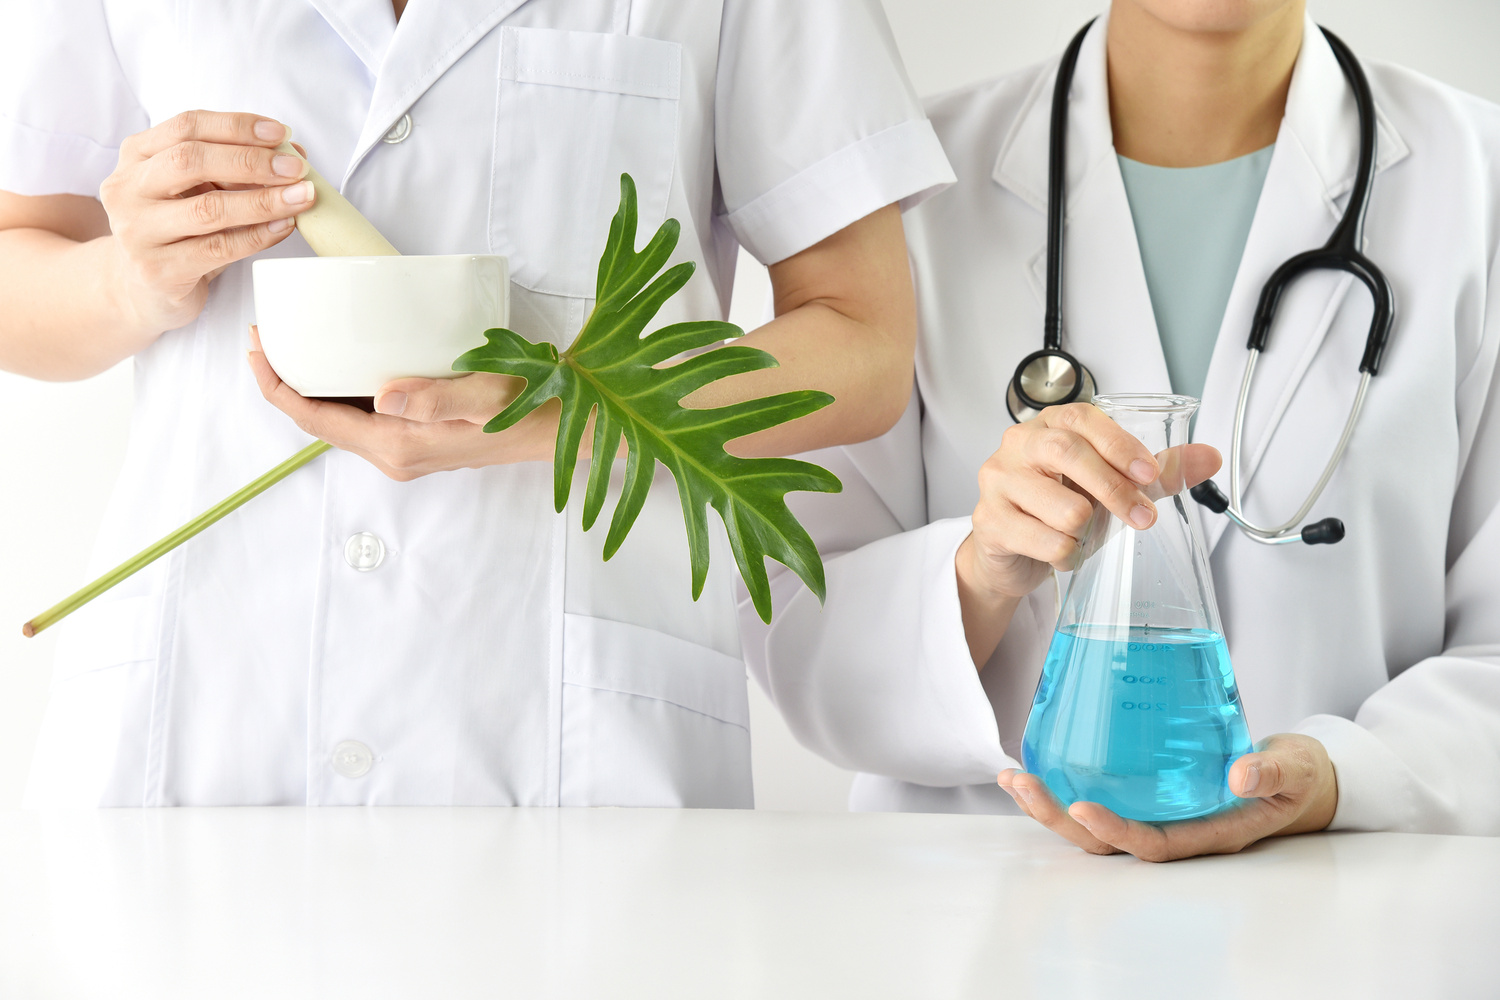 Modern and traditional medical, Alternative organic herbal drug and chemical medicine, Integrating various treatment healthcare.